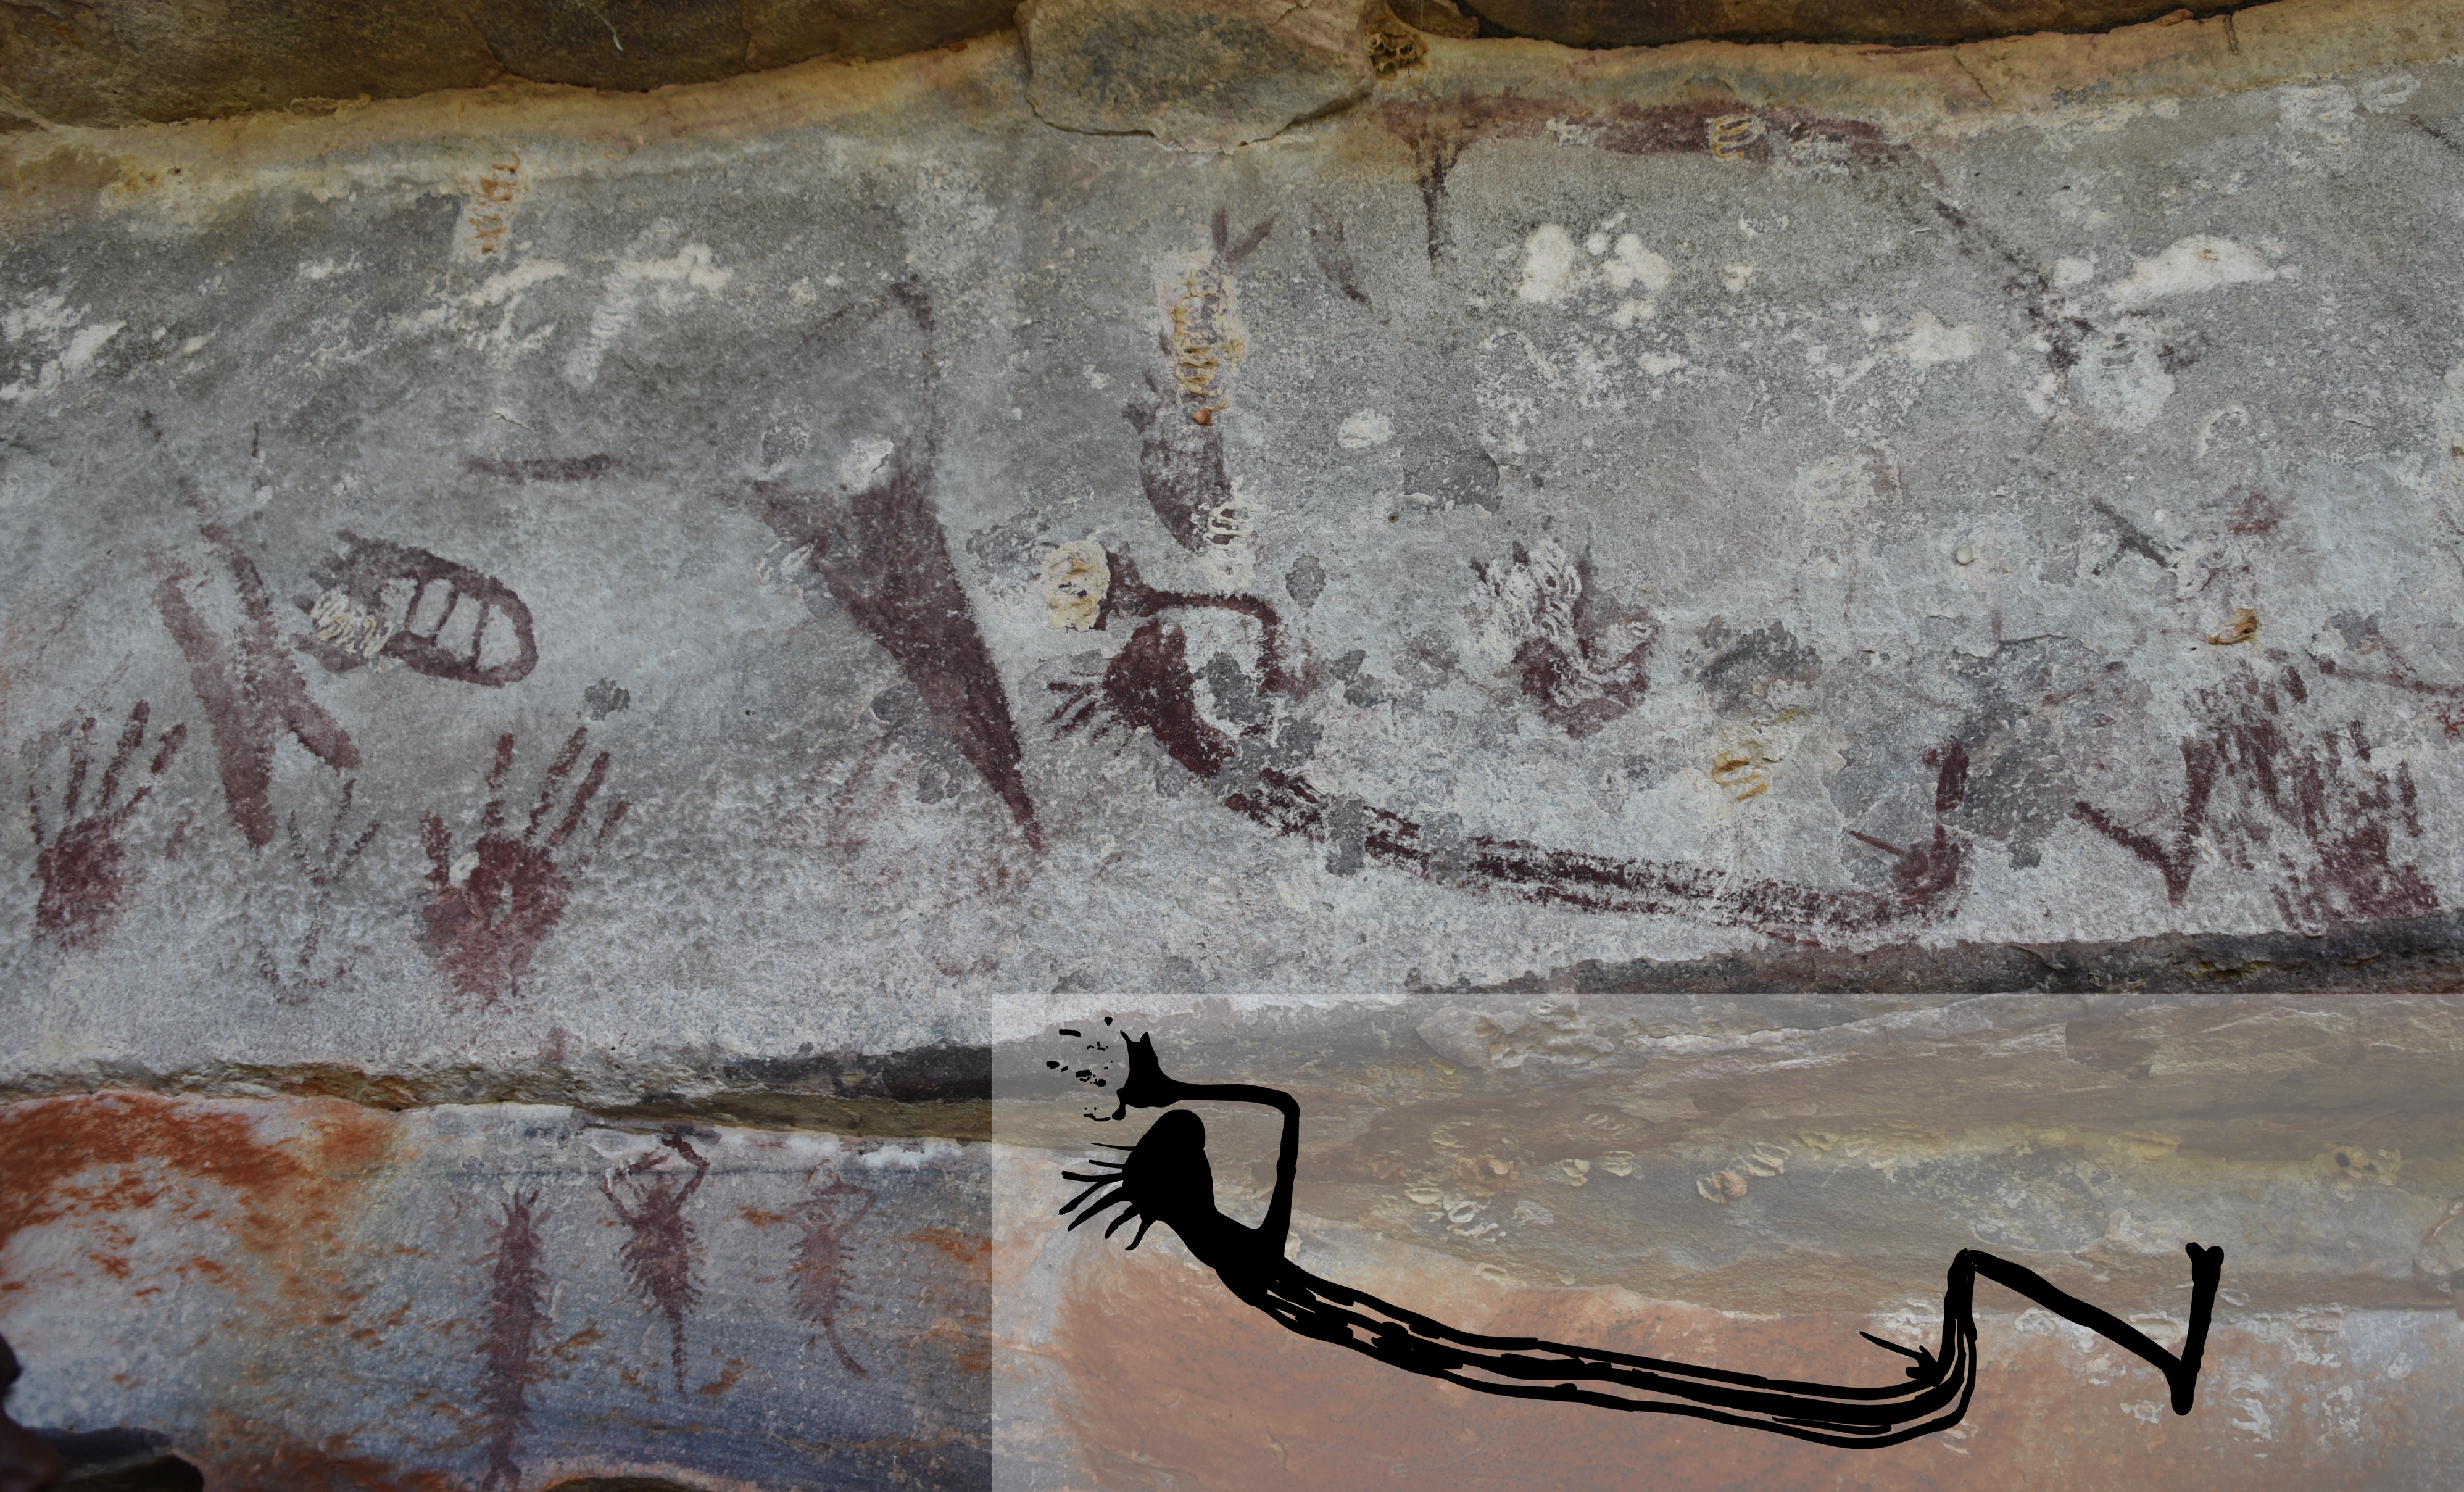 A rare depiction of a human, seen in a reclining position. Yellowish splotches on the cave wall are former mud wasp nests, which was used to date the artworks.  (Image: Pauline Heaney and Damien Finch)